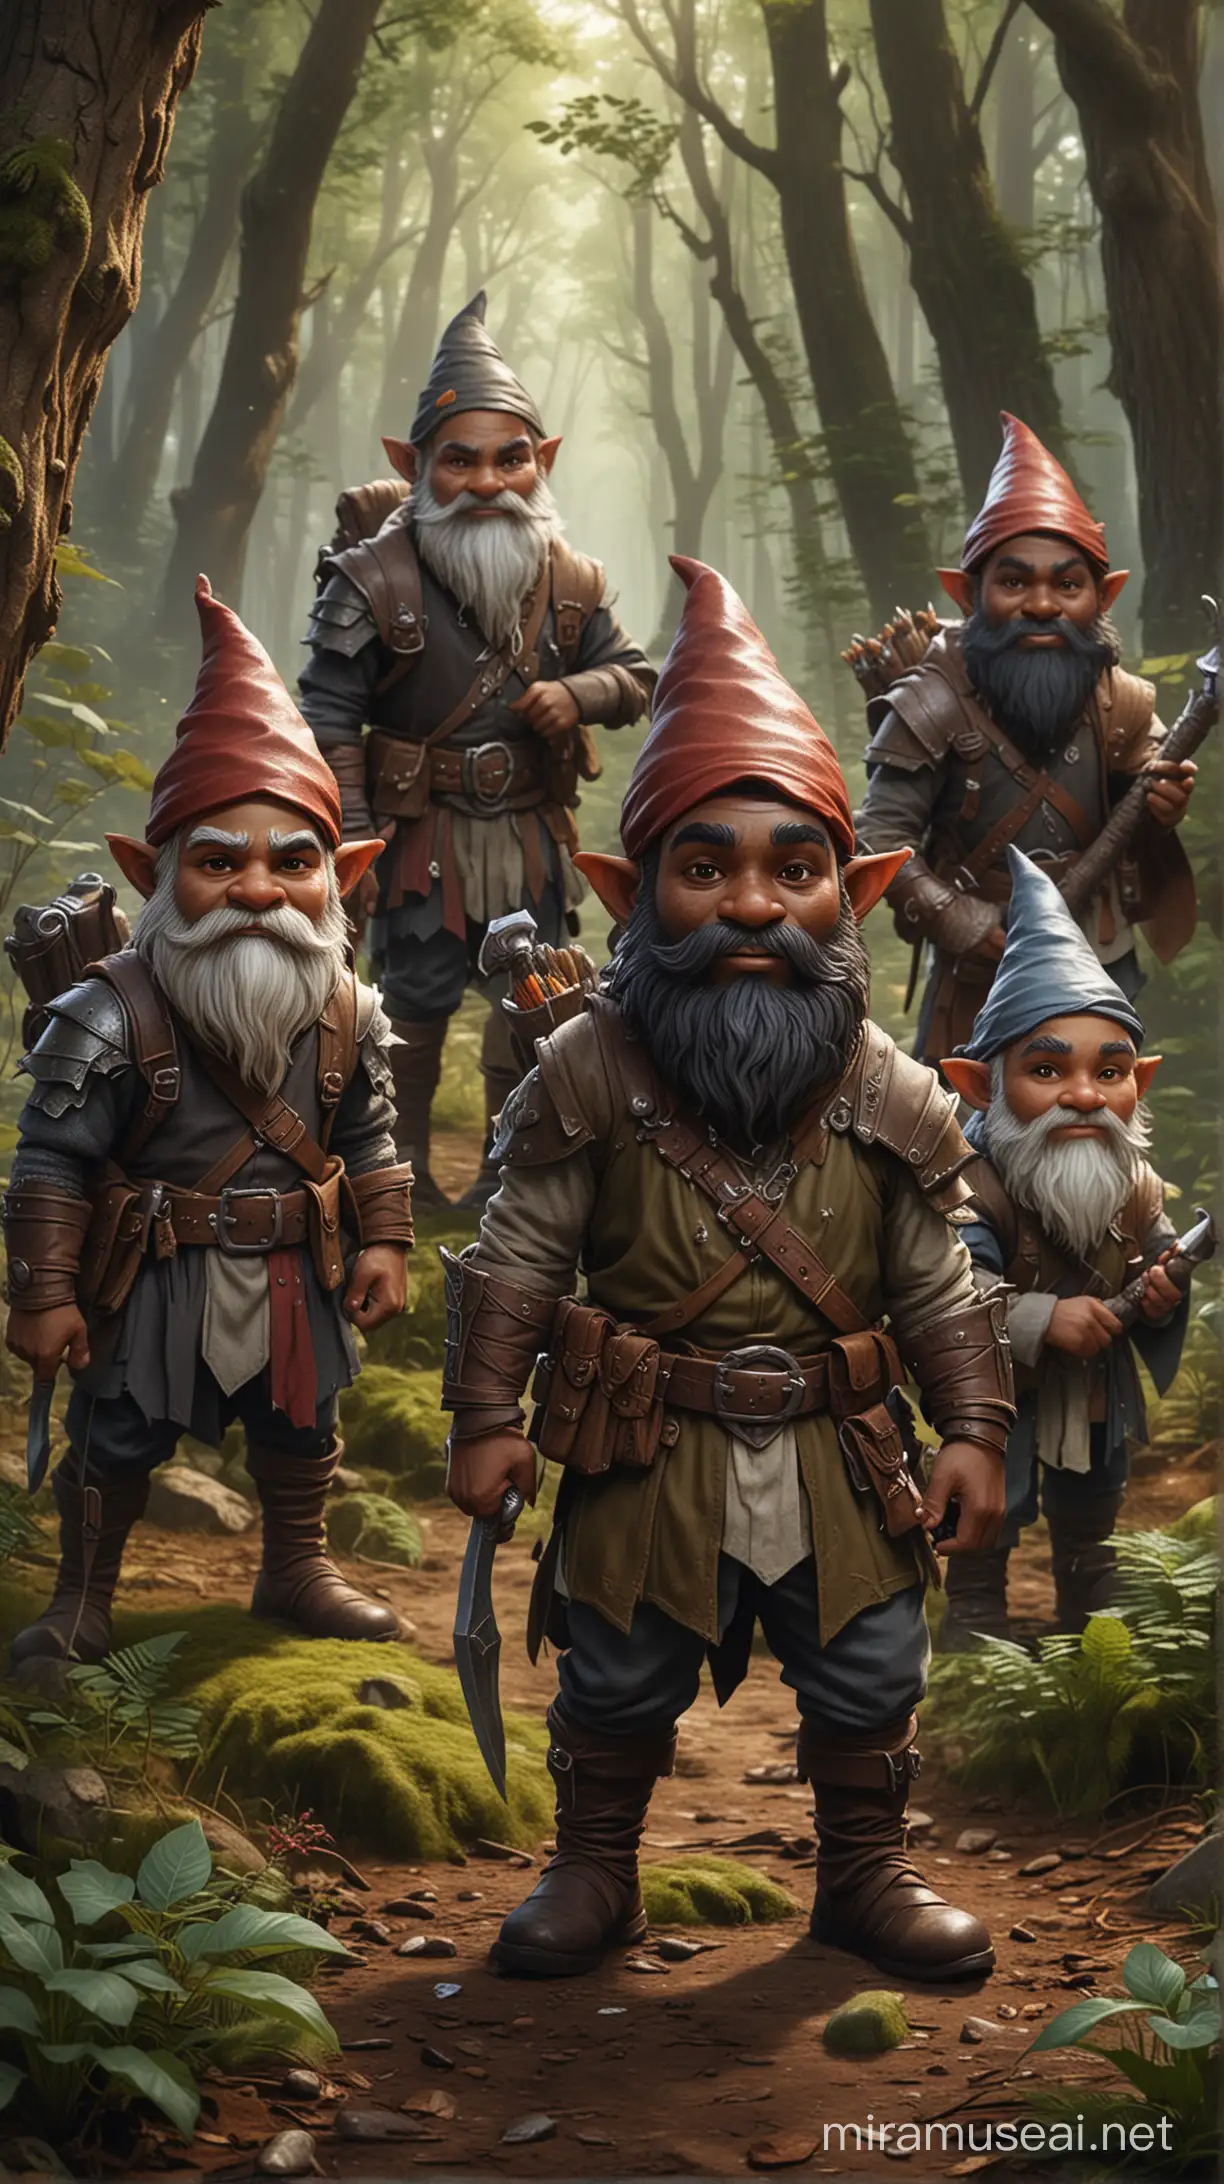 Friendly Dark Skinned Gnome Hunters Gathering in Forest